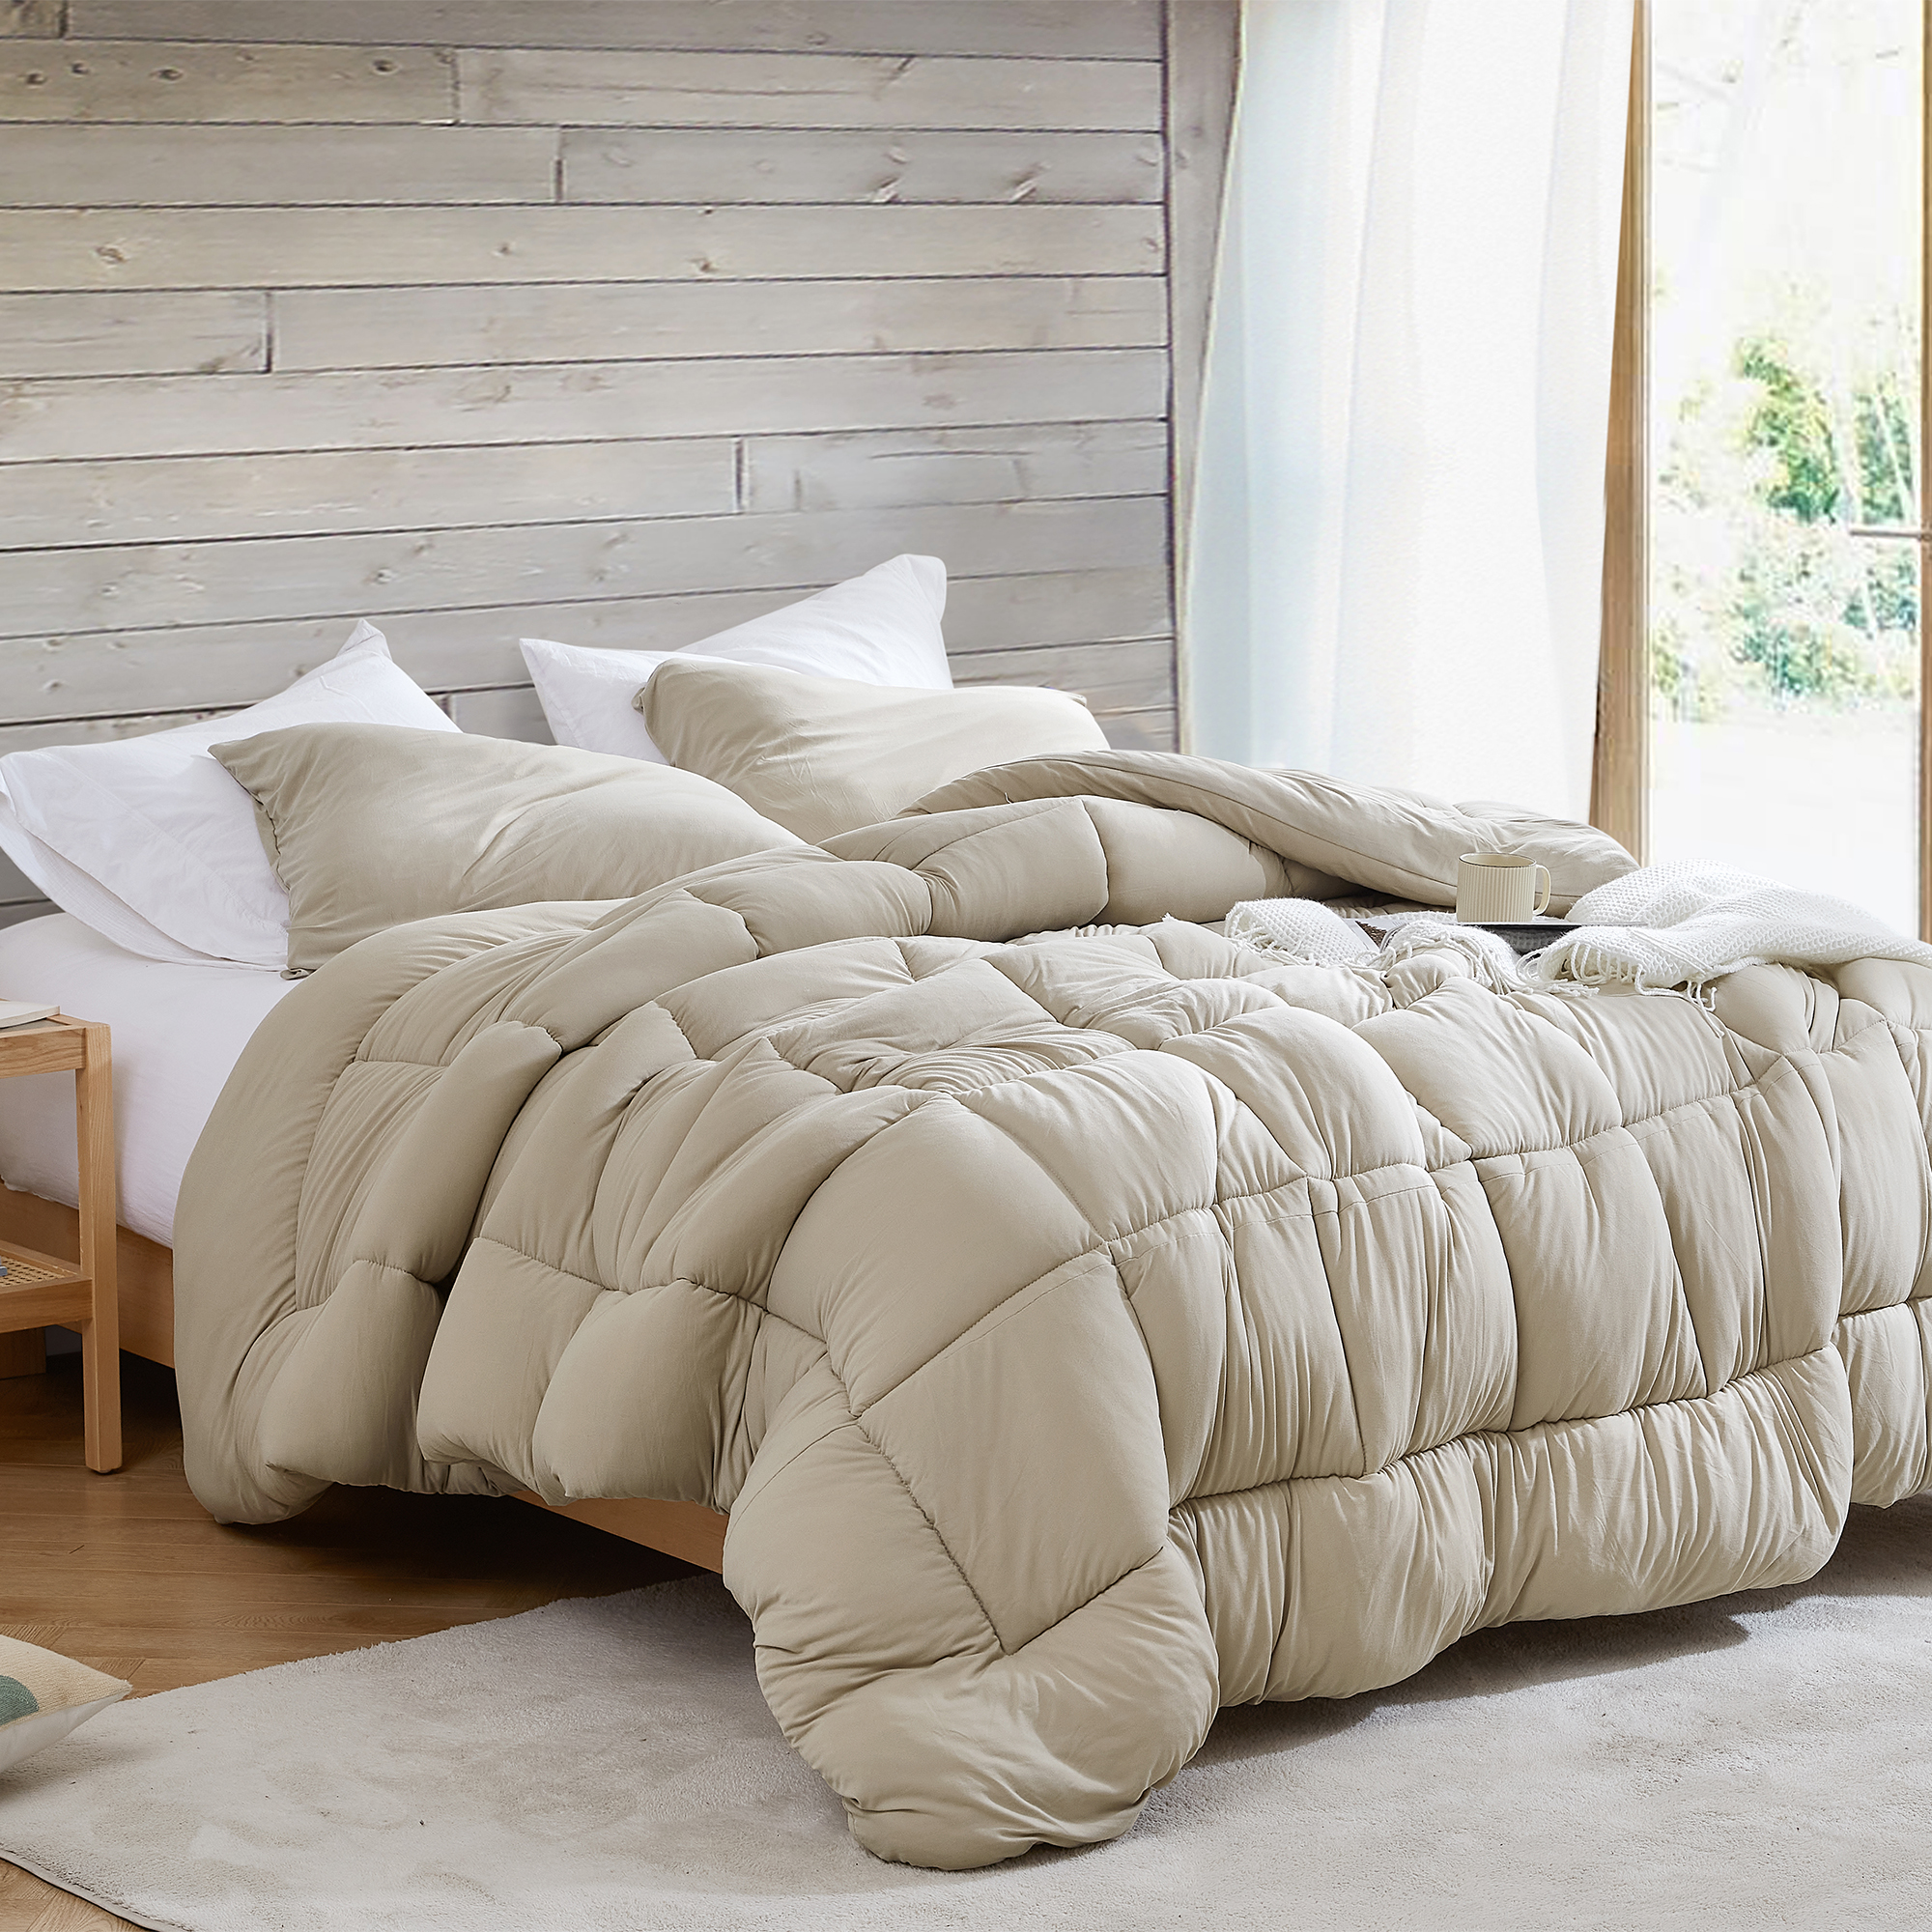 Summertime - Coma Inducer® Oversized Queen Comforter - Cement Taupe